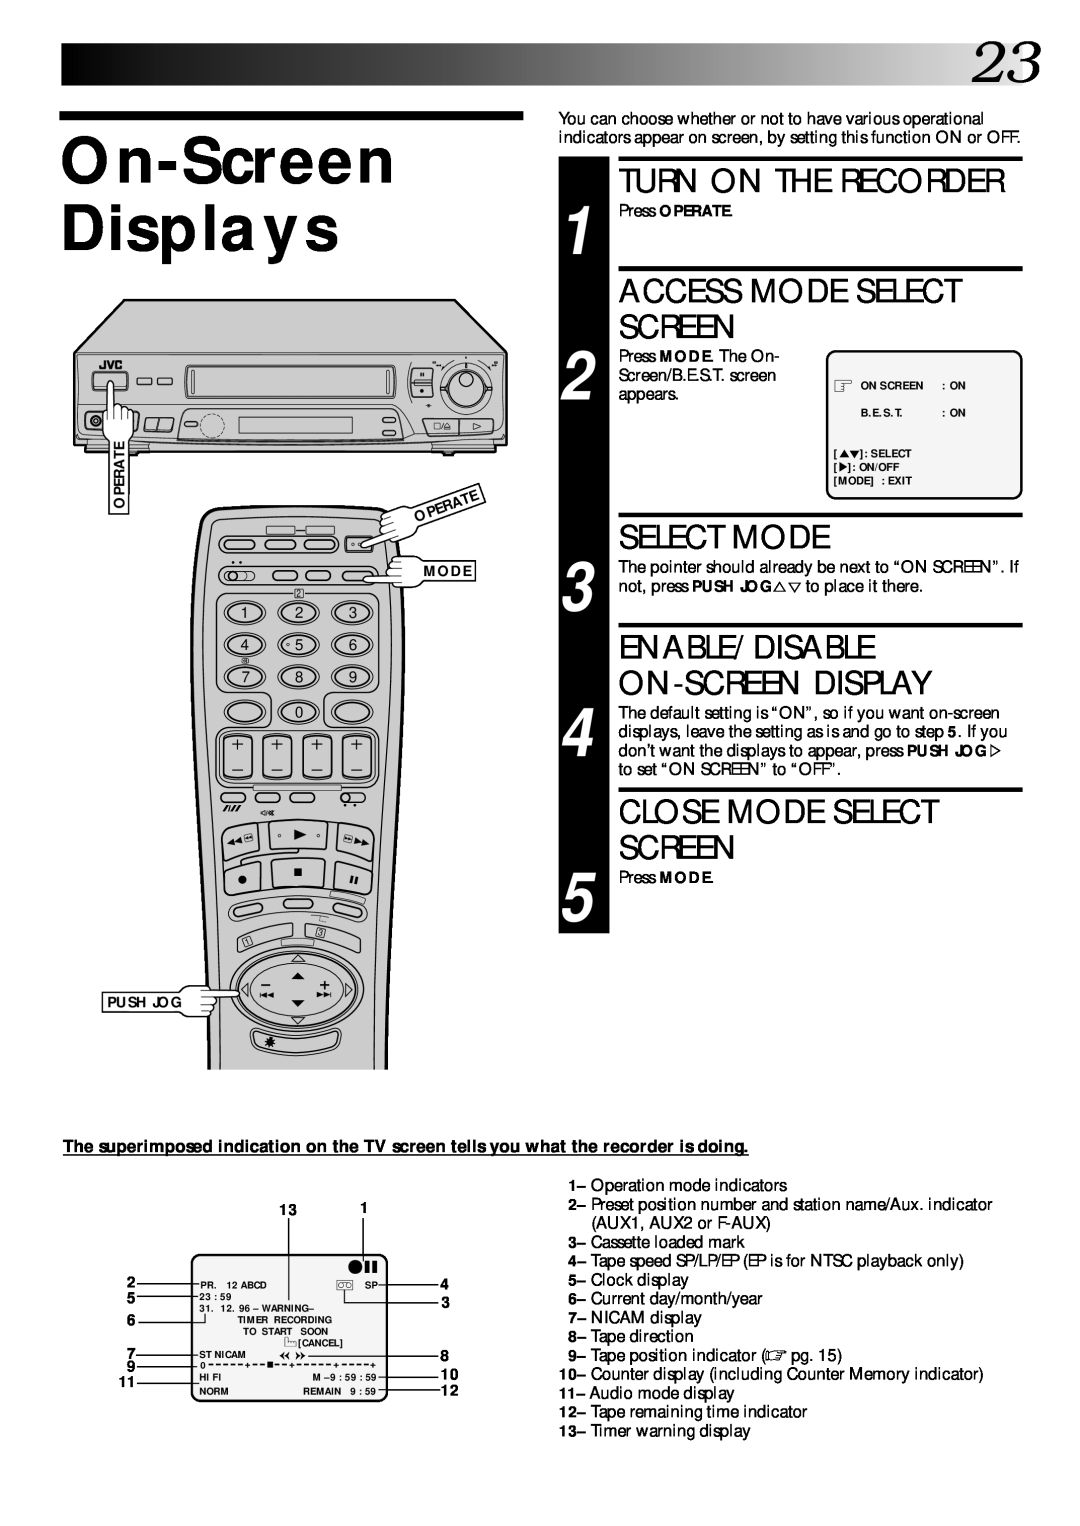 JVC PU30425 On-Screen Displays, Select Mode, Enable/Disable, Turn On The Recorder, Access Mode Select, Close Mode Select 